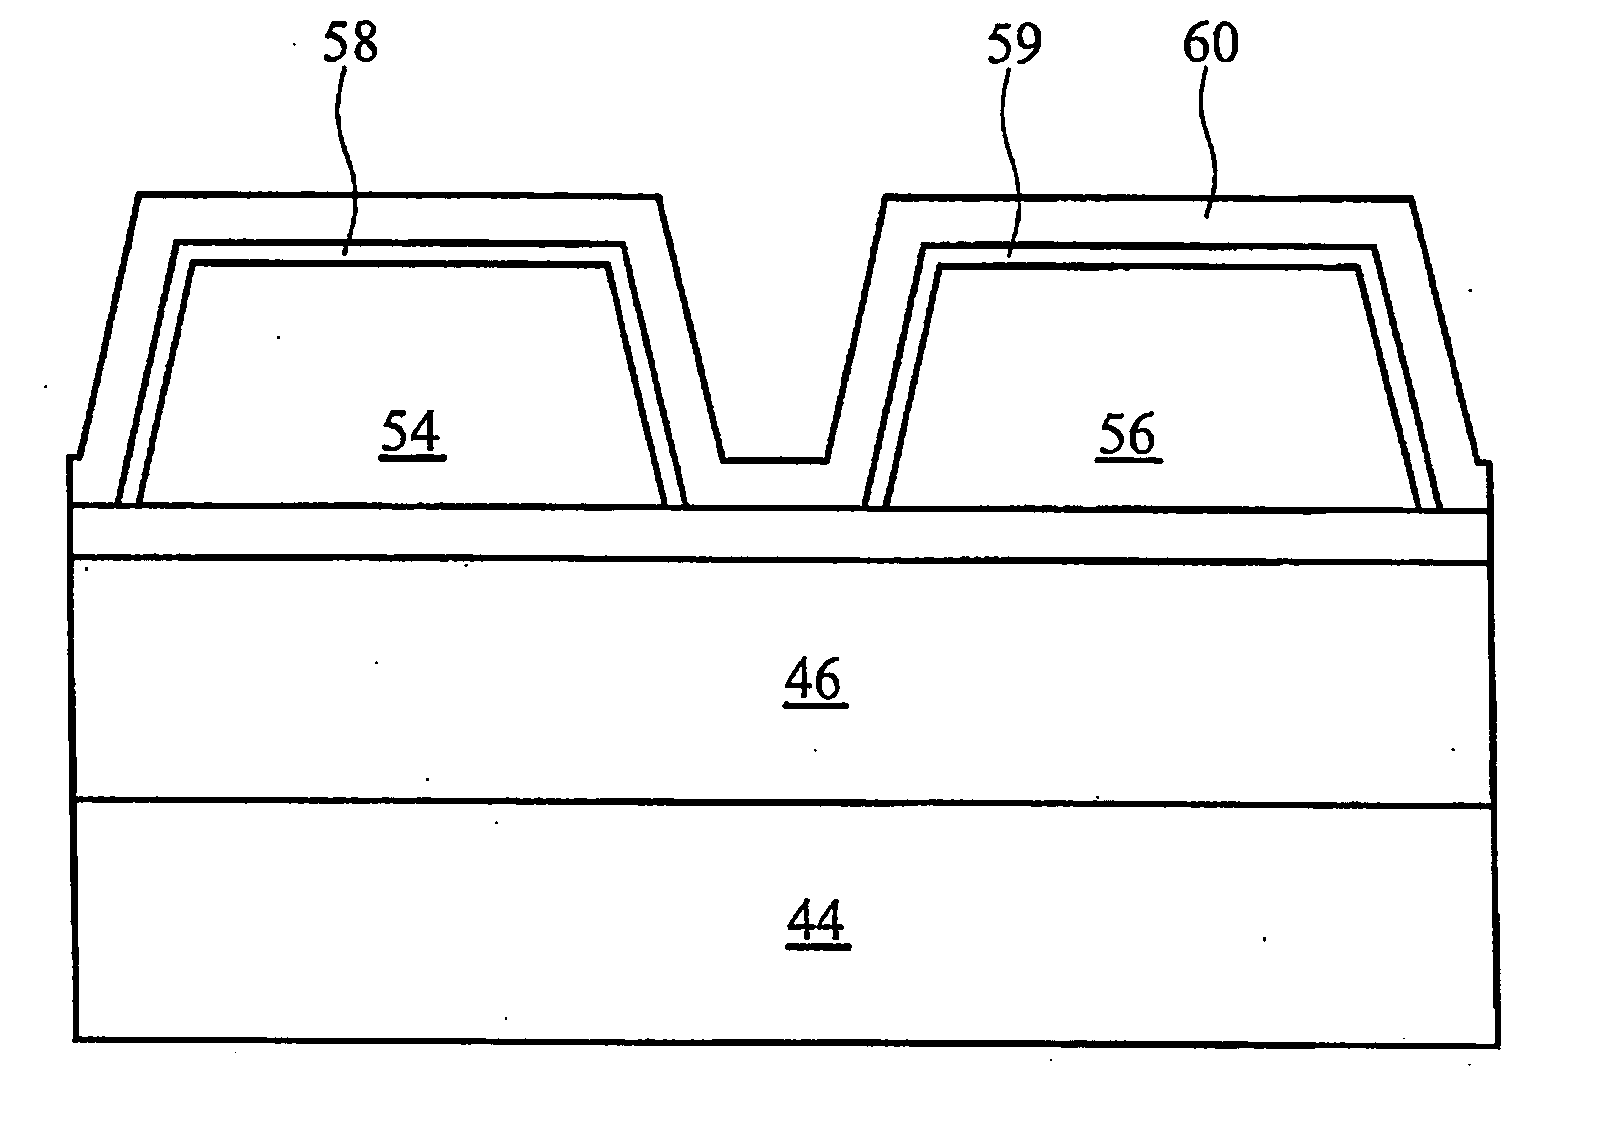 Apparatus and method for multiple-gate semiconductor device with angled sidewalls